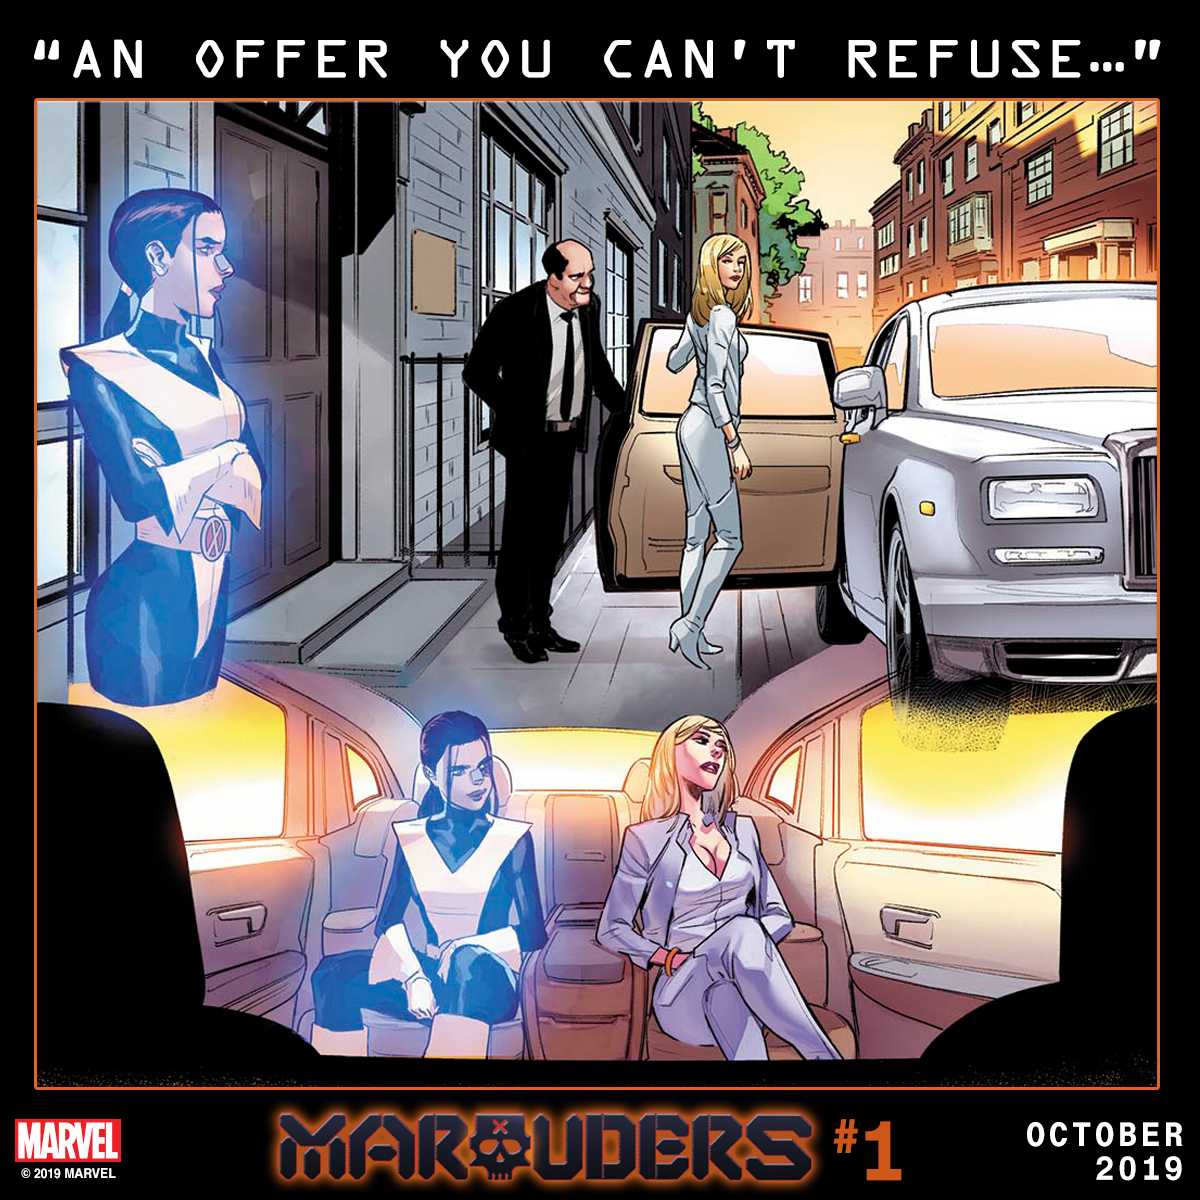 Marvel Comics teases "An offer you can't refuse" in new Marauders #1 promo